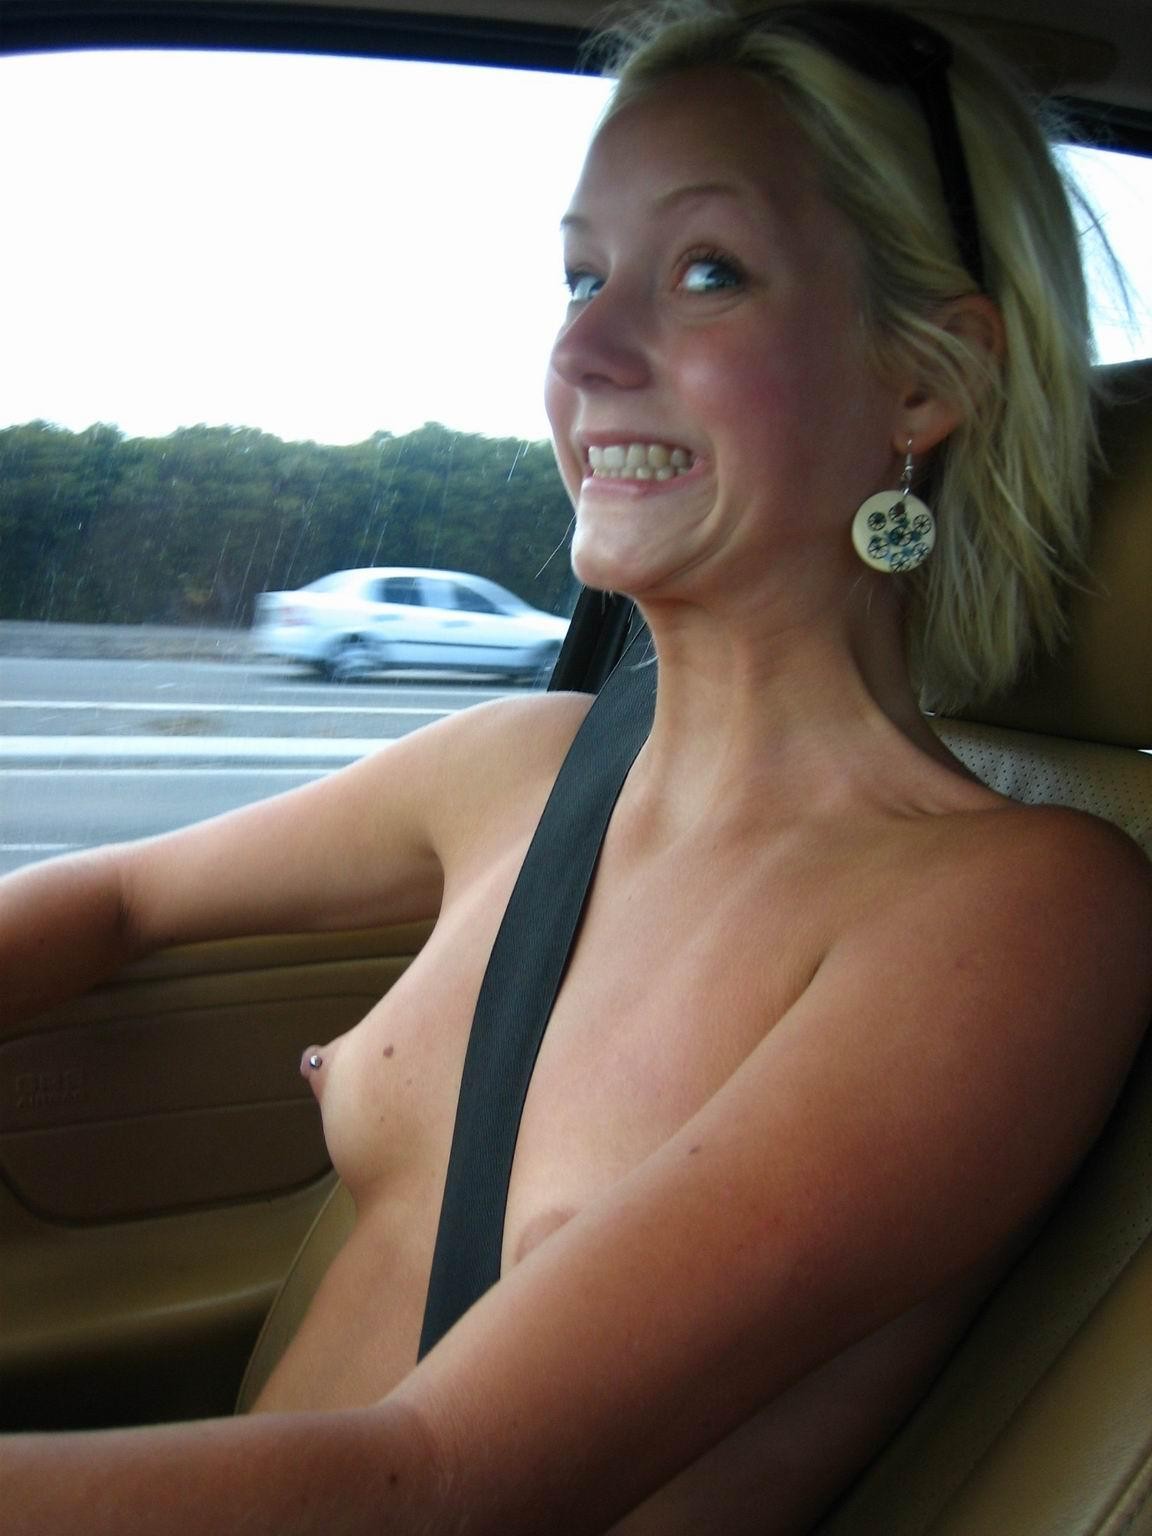 Topless in her c